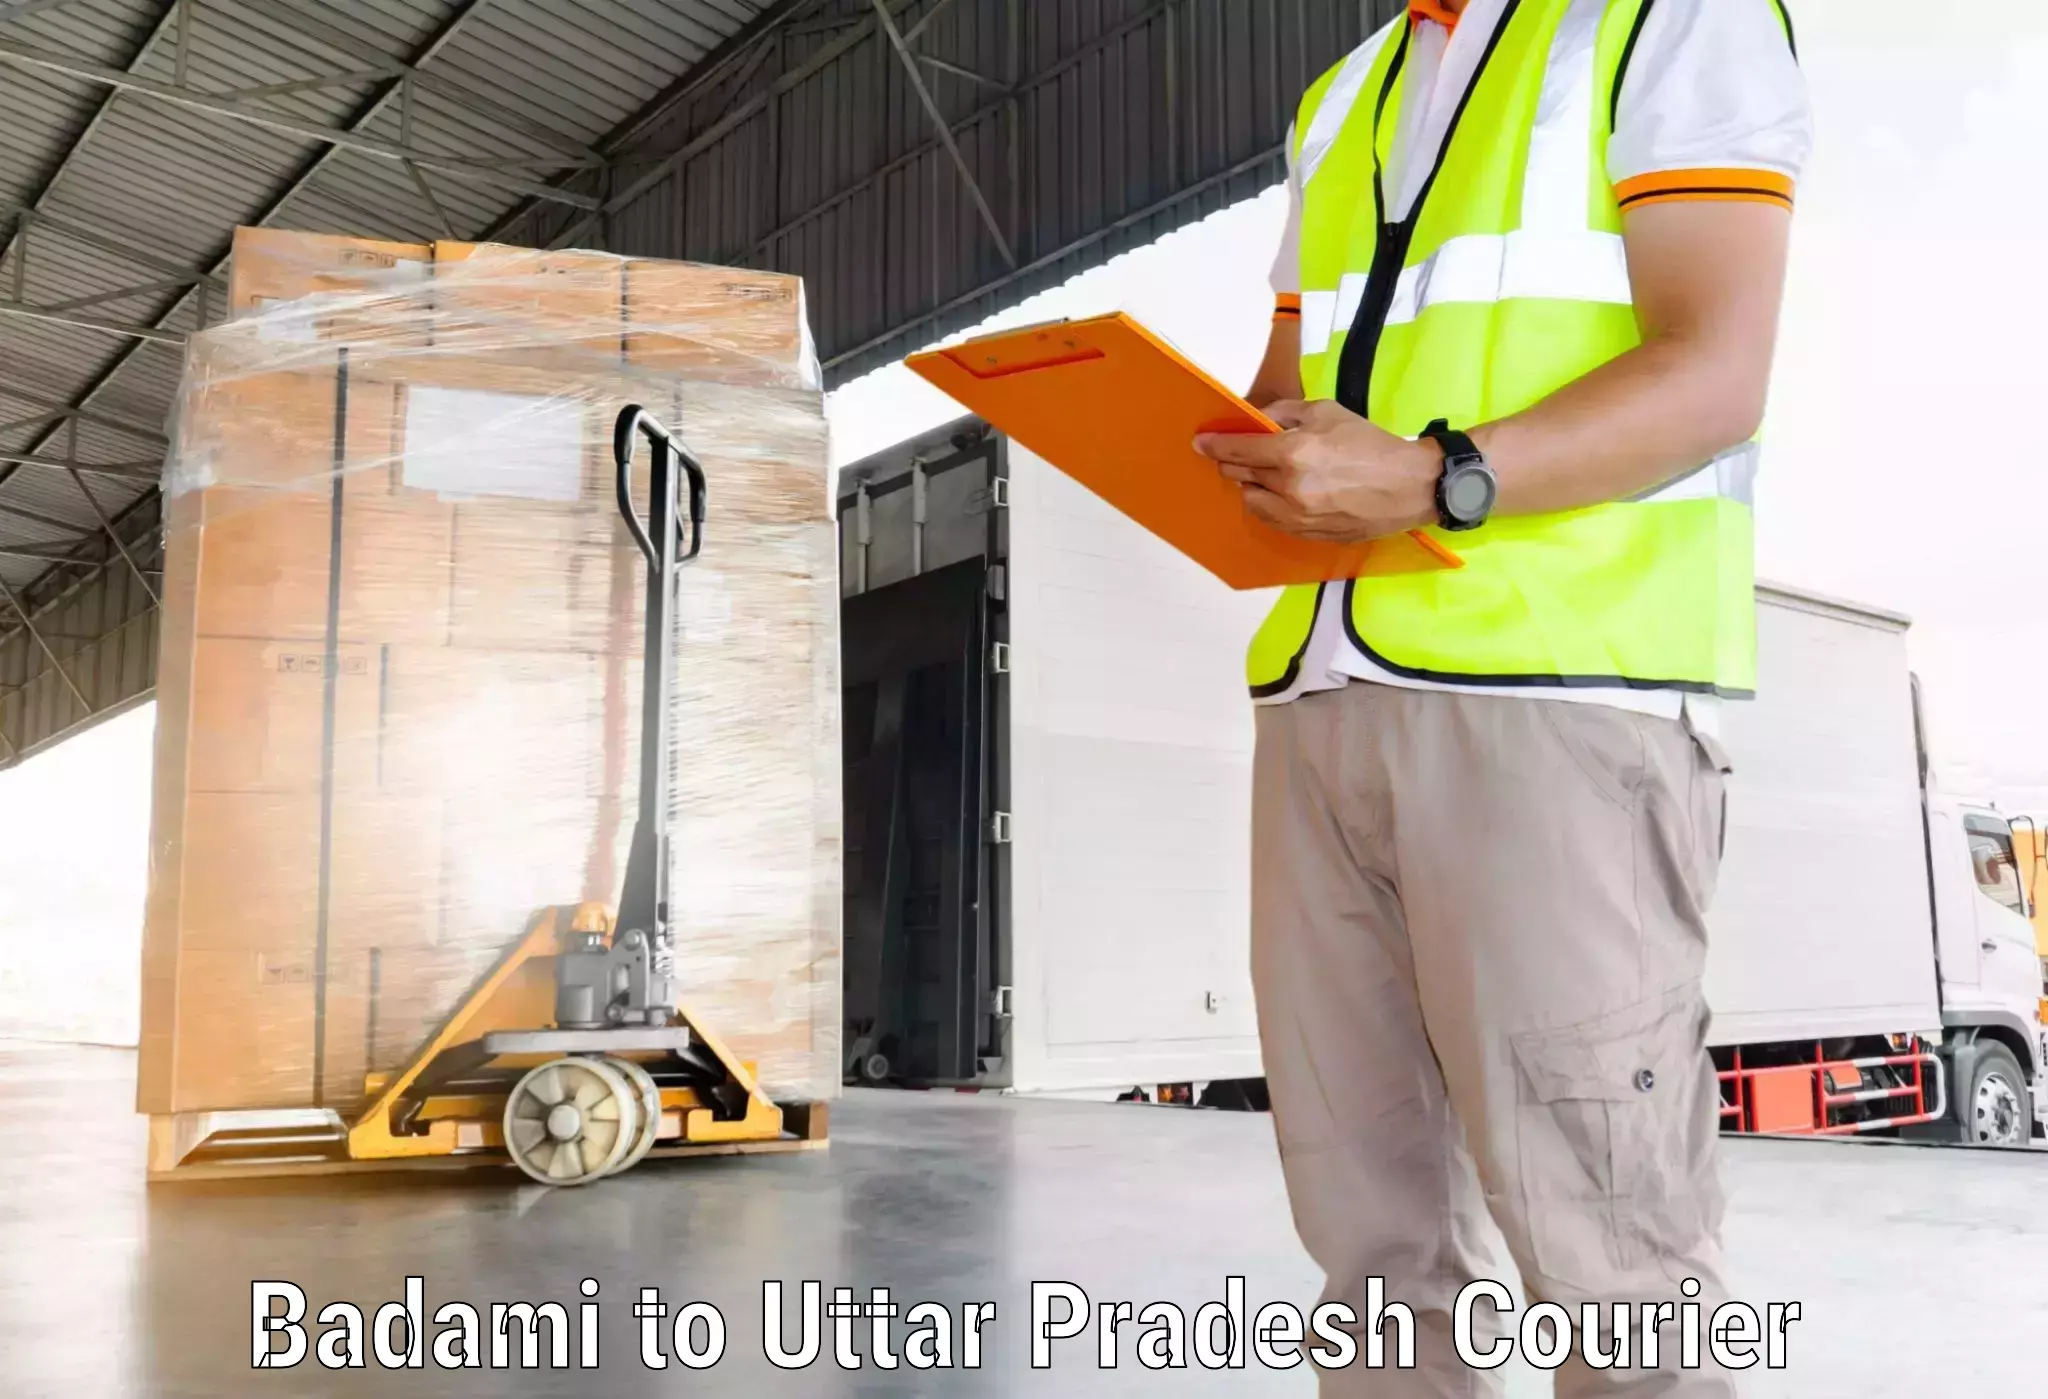 Express delivery capabilities in Badami to Shahjahanpur